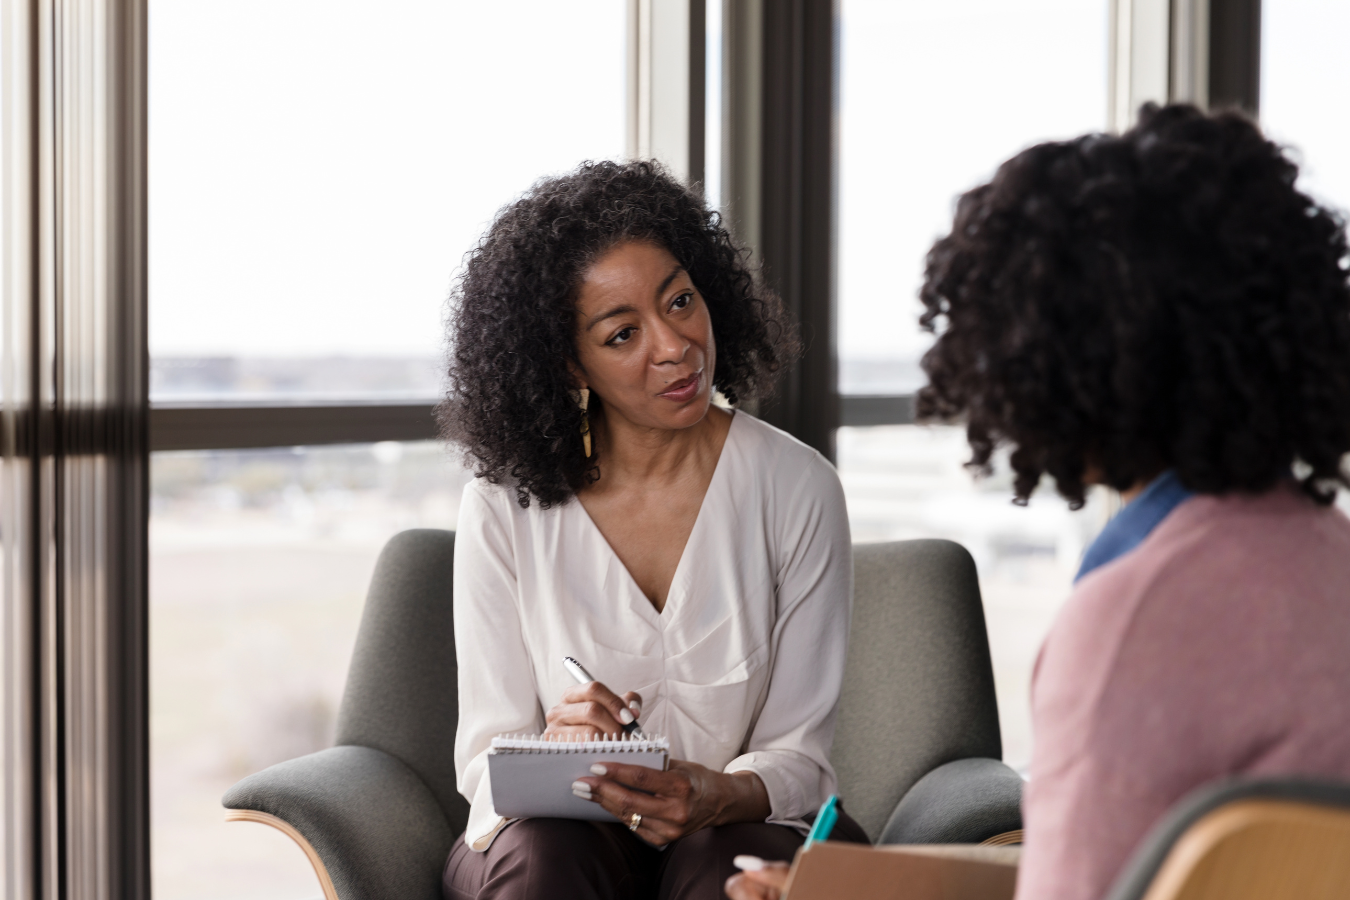 A mental health professional speaks with a client while writing down in her notebook. Mental health-focused ERP software can help promote care in mental health practice facilities.